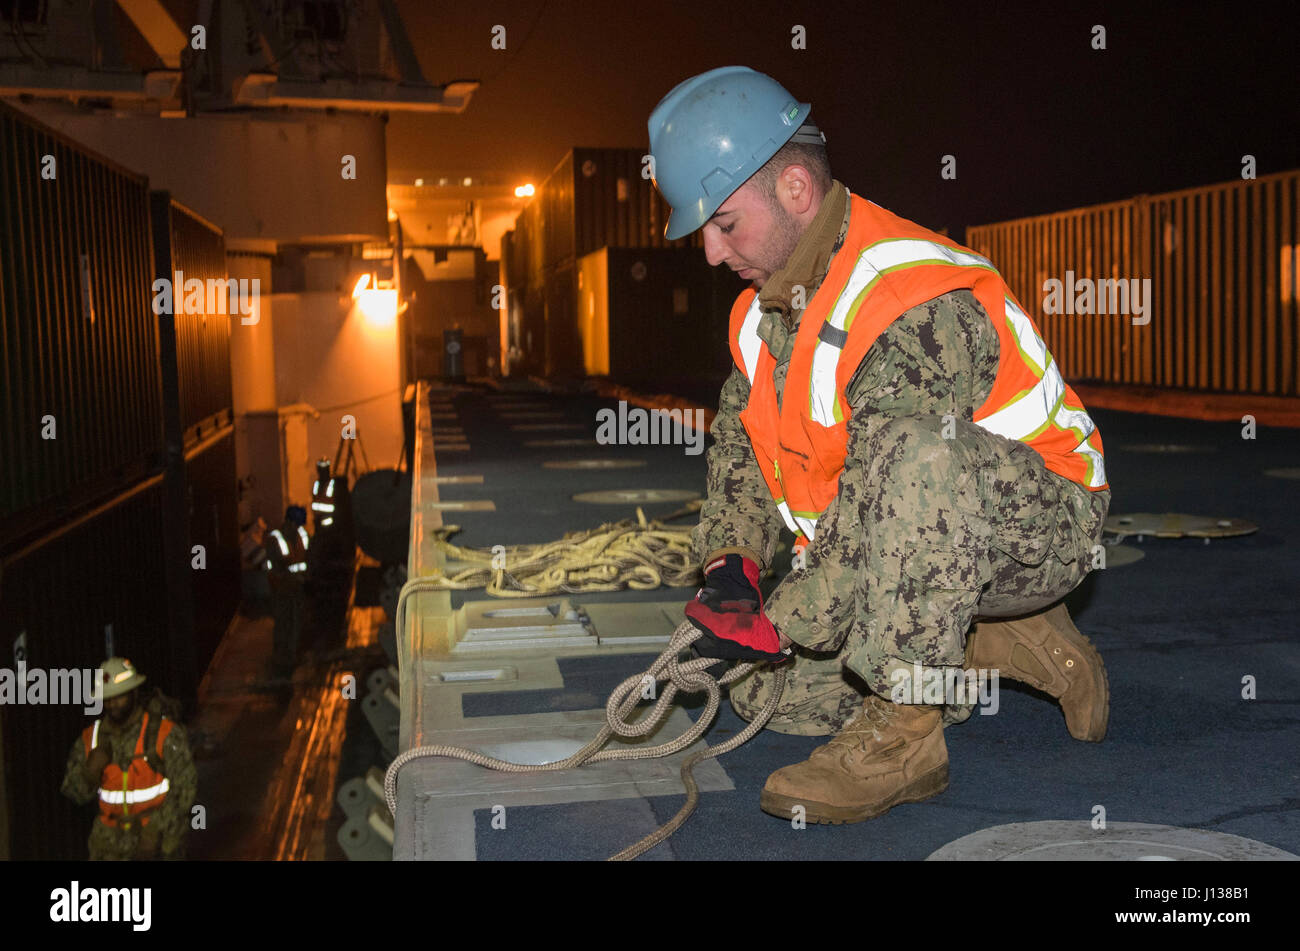 170408-N-OU129-457 POHANG, Republic of Korea (Apr. 9, 2017) Boatswain Mate Seaman Nicholas Kakoules from Navy Cargo Handling Battalion One secures lines to a beach module for unloading from Navy Maritime Prepositioning Force Ship USNS Pililaau (T-AK 304) using Improved Navy Lighterage System (INLS) while anchored off the coast of Pohang, Republic of Korea during Combined Joint Logistics Over the Shore (CJLOTS) April 9. CJLOTS is a biennial exercise conducted by military and civilian personnel from the United States and the Republic of Korea, training to deliver and redeploy military cargo as a Stock Photo